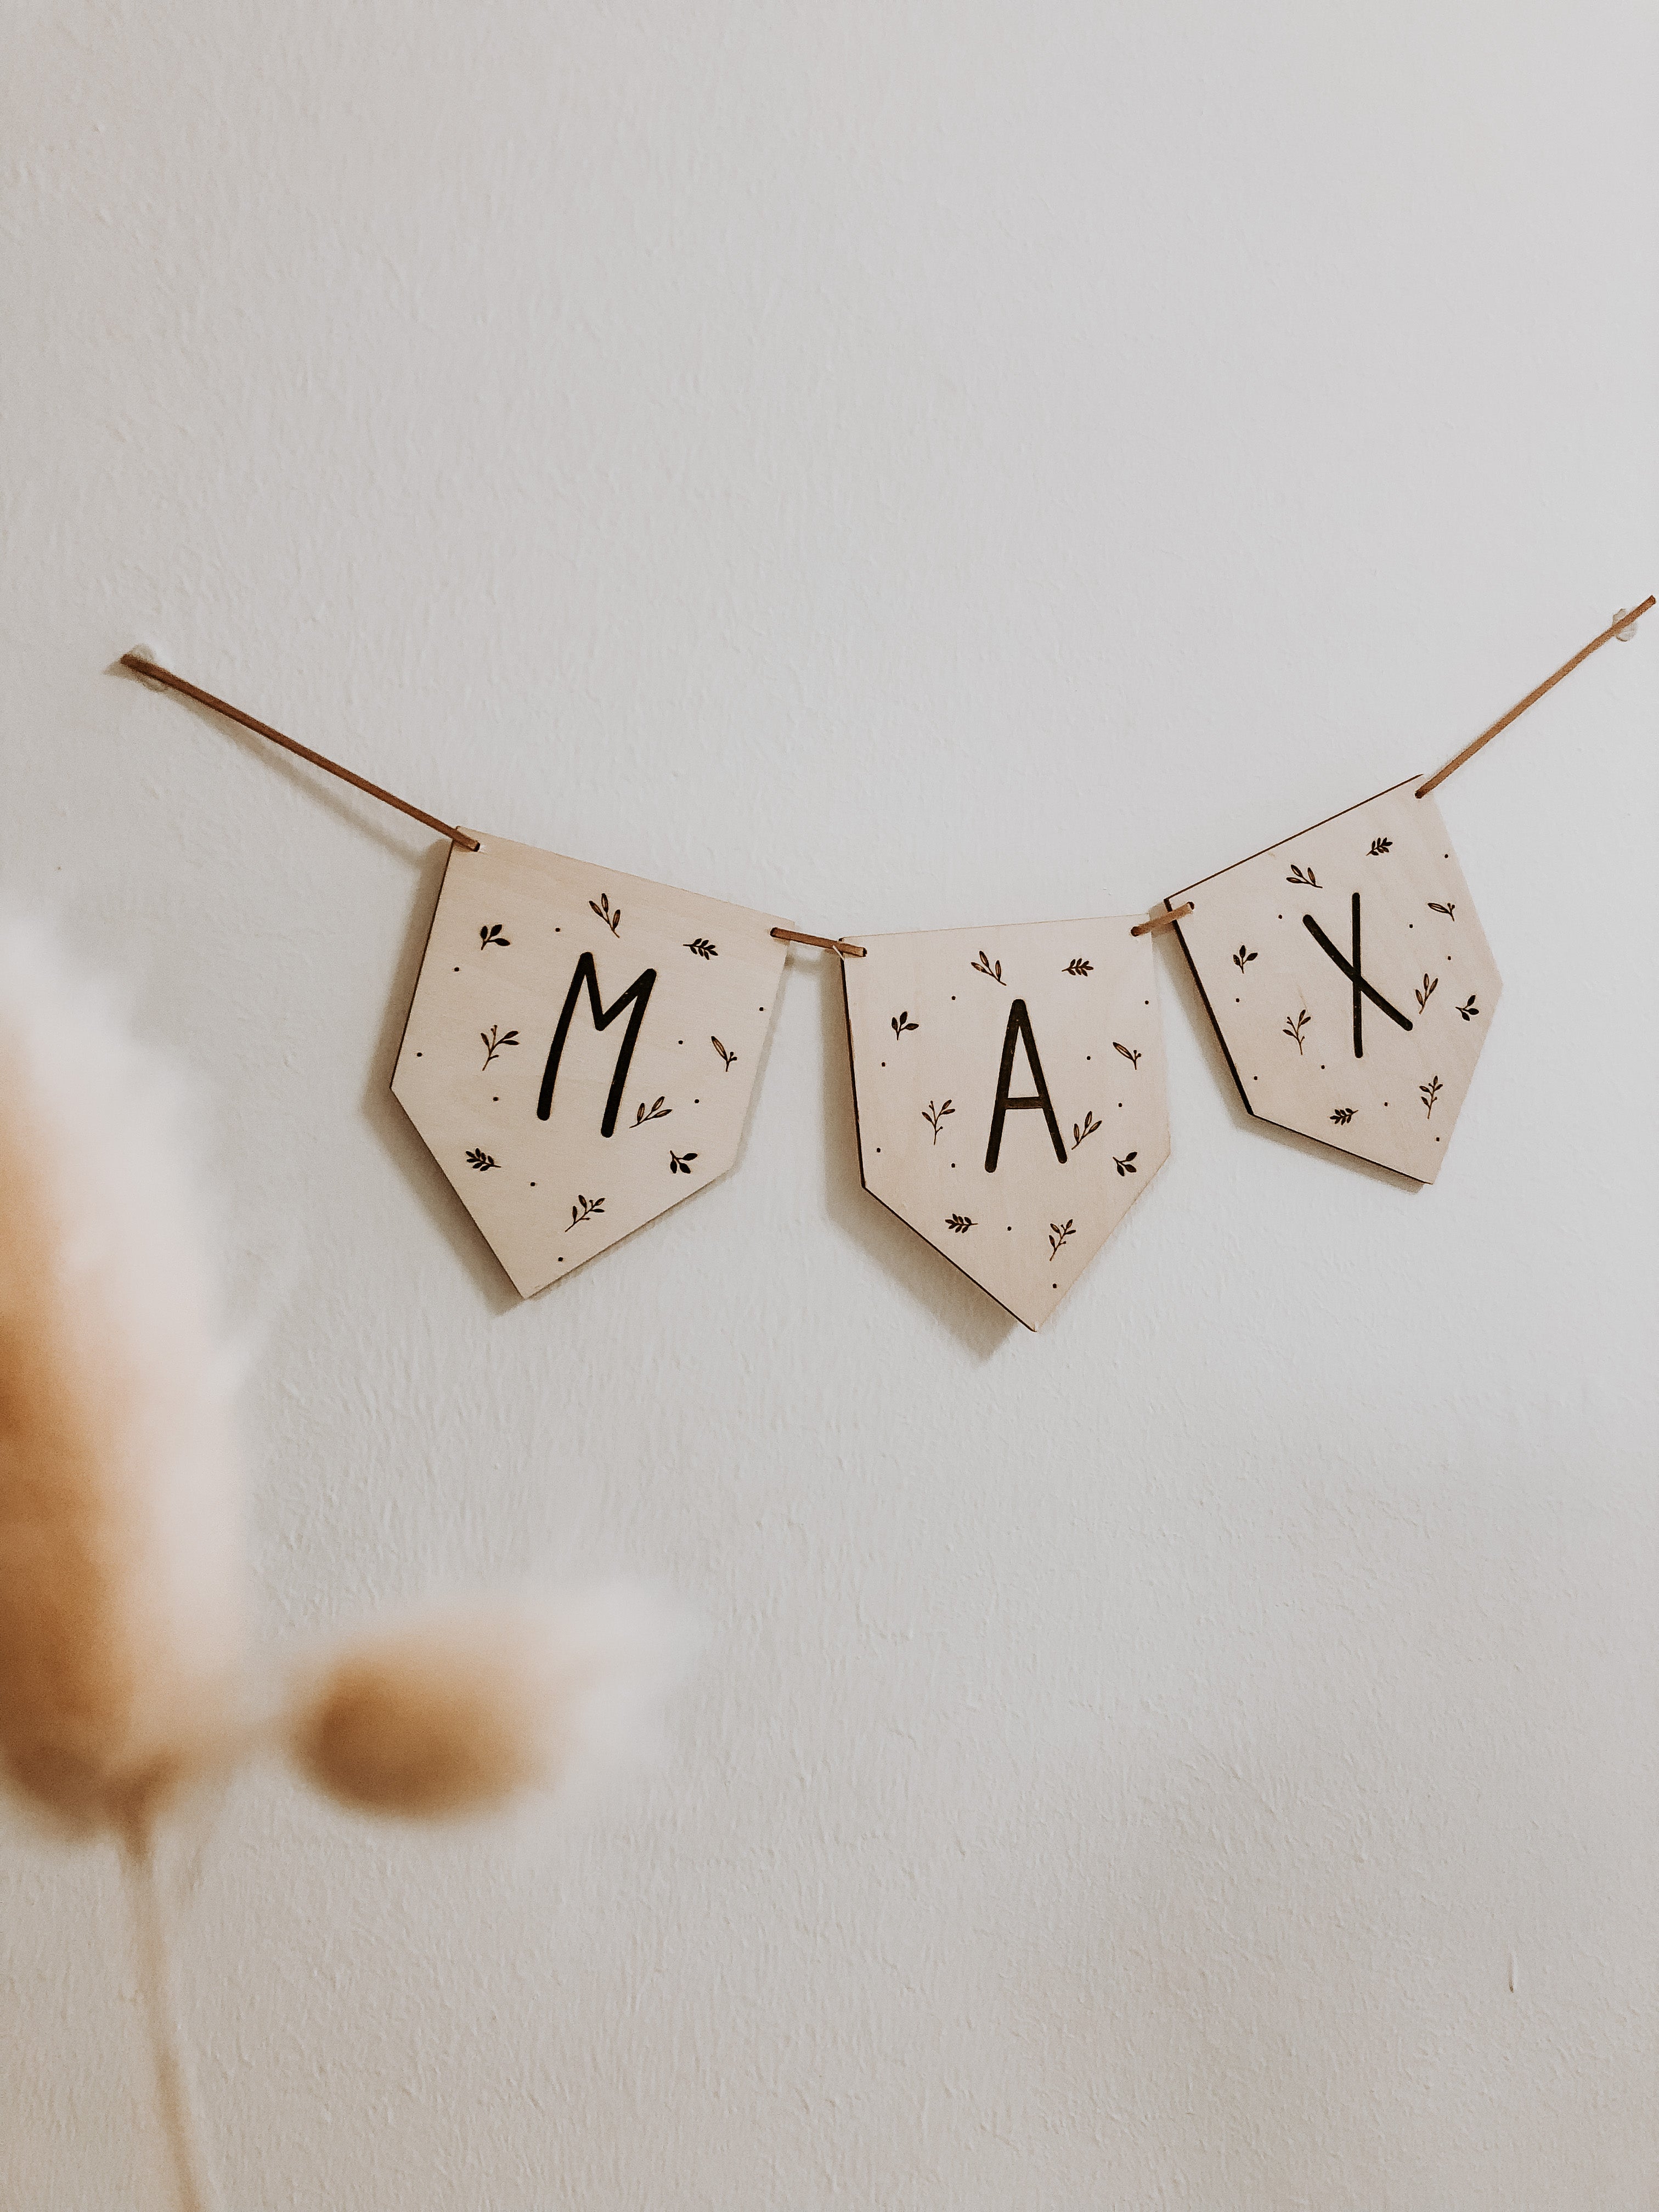 Name garland pennant garland made of wood personalized leaves and dots